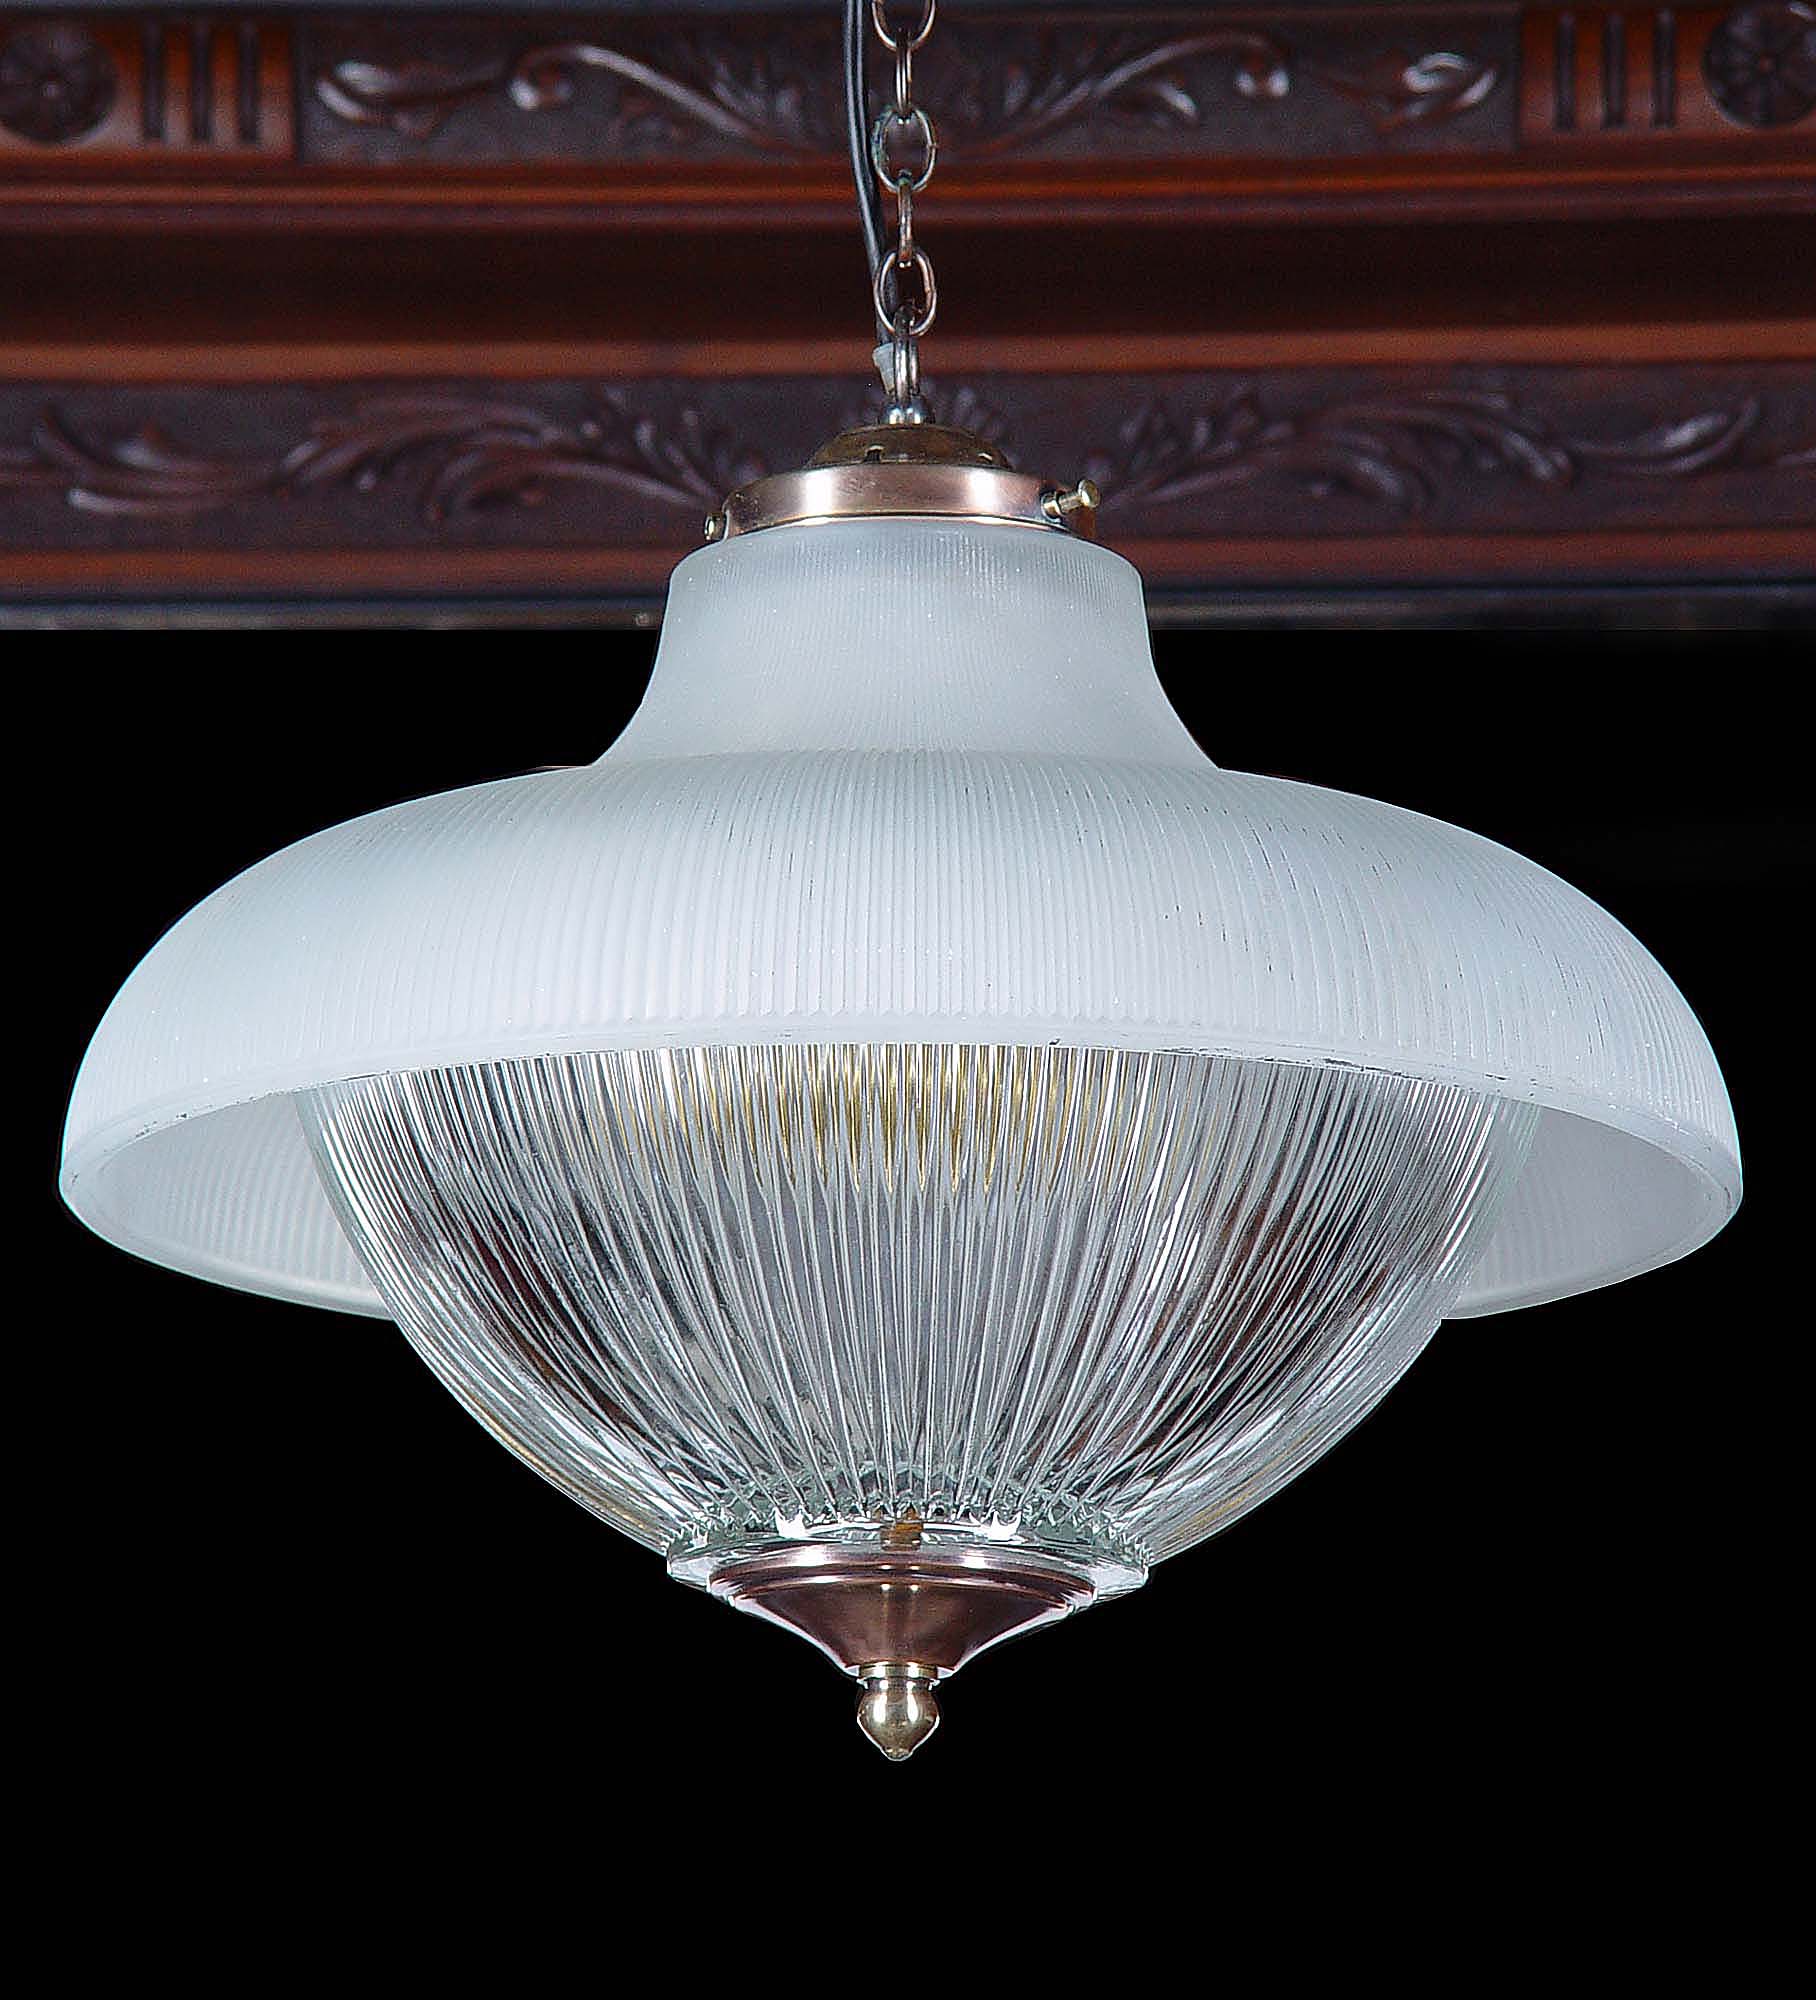 Upgrade your home with art deco ceiling lights | Warisan Lighting